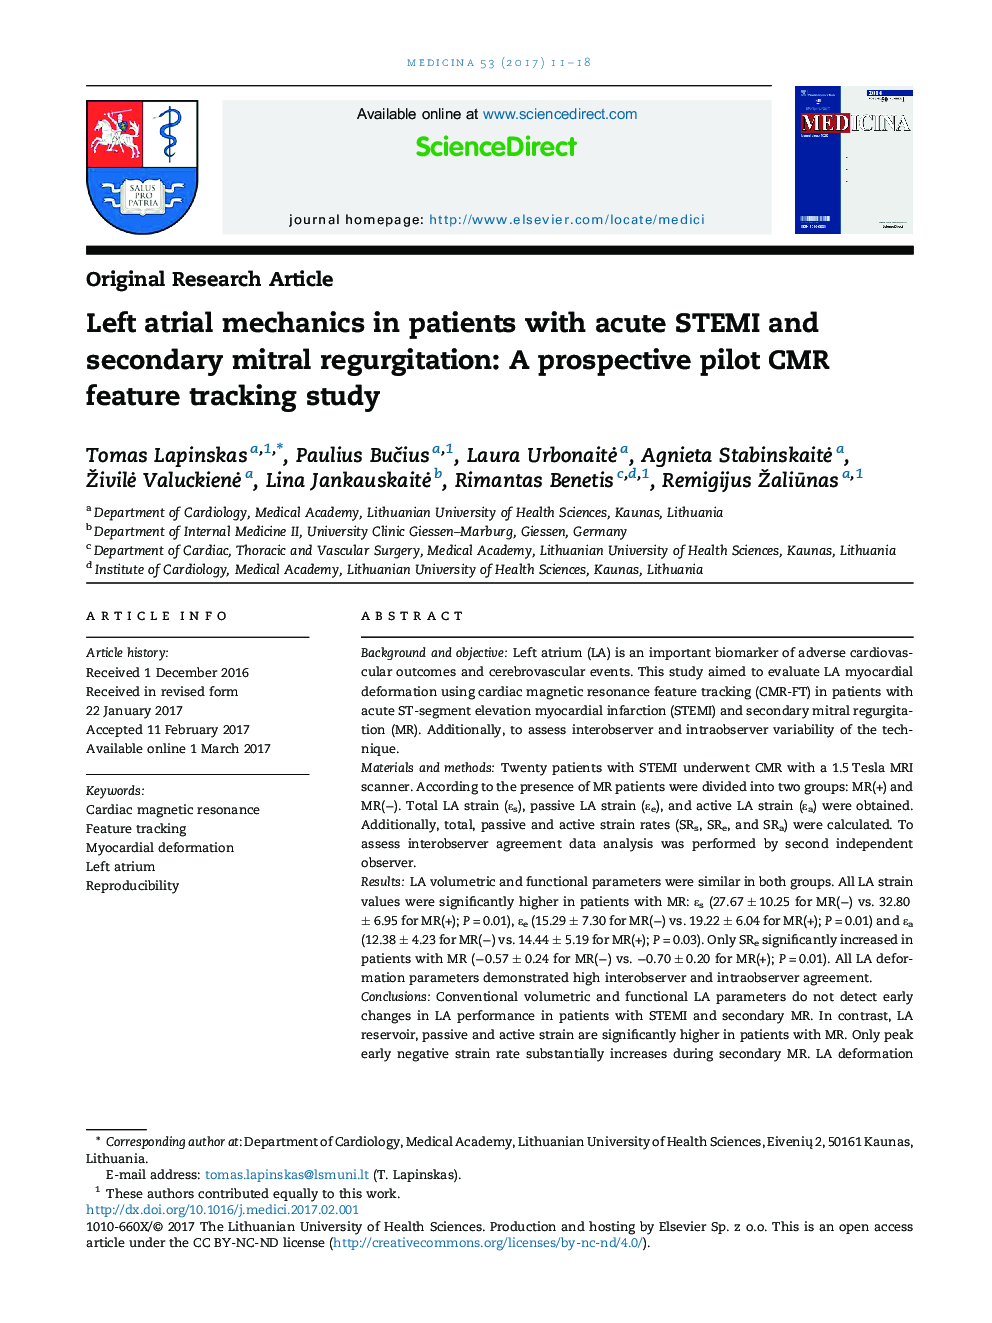 Left atrial mechanics in patients with acute STEMI and secondary mitral regurgitation: A prospective pilot CMR feature tracking study